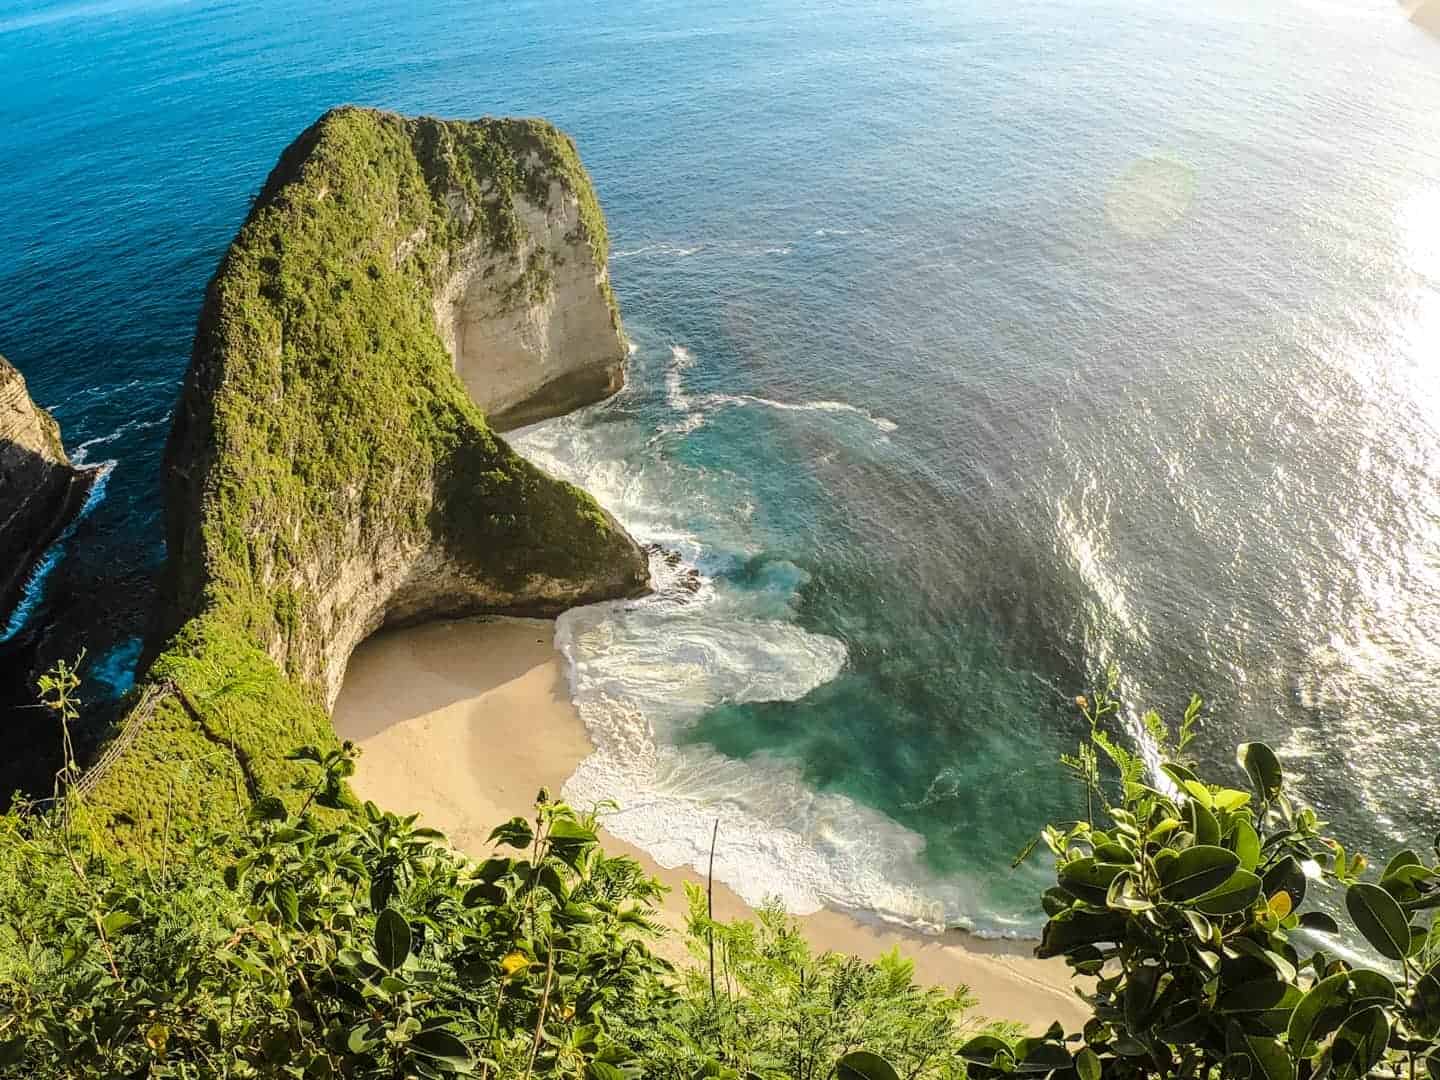 Best Places to Travel Solo - Bali